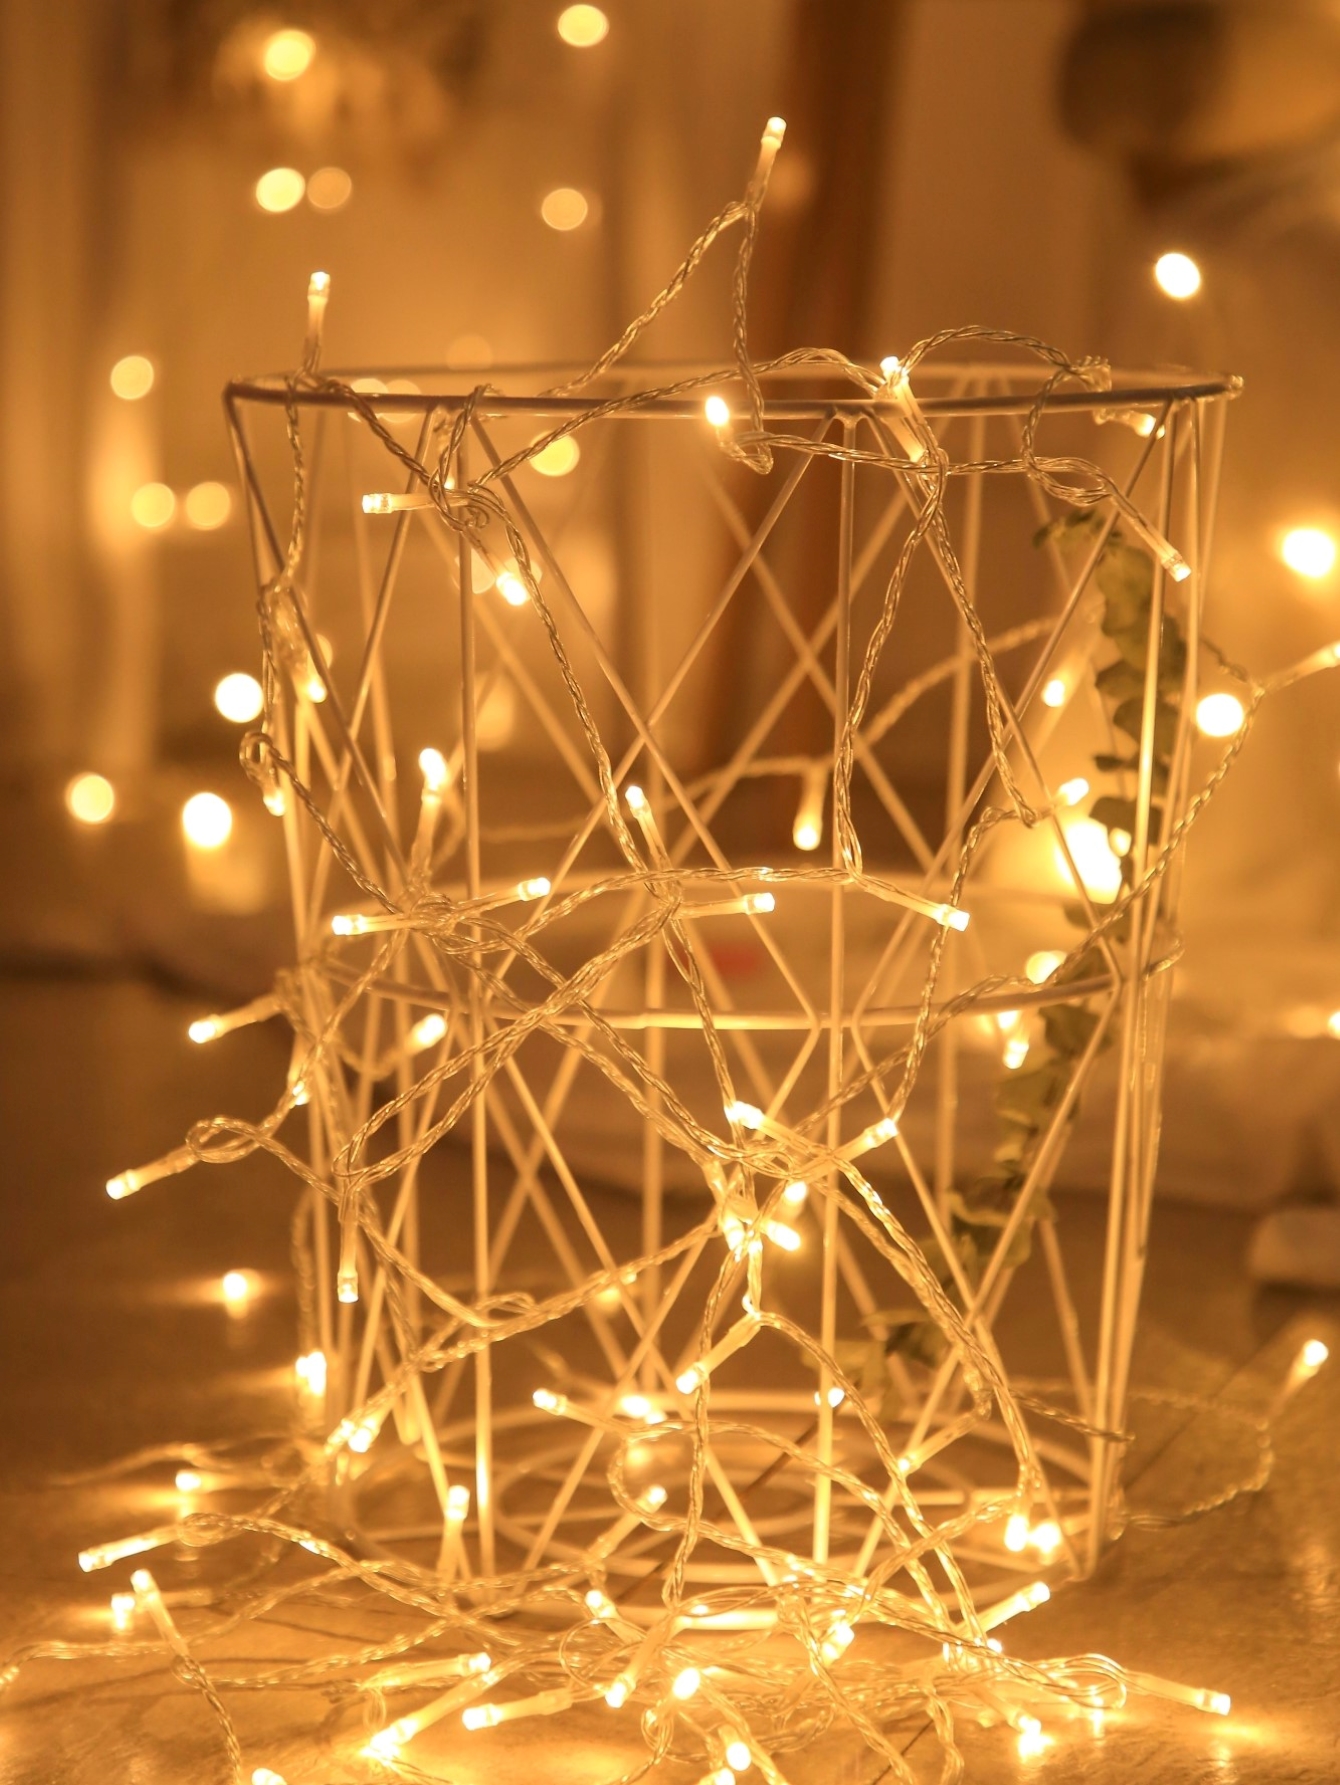 elegant led string lights for christmas parties 6 56ft 9 84ft 12 12ft 32 8ft perfect for decorating and enhancing the festive spirit details 11